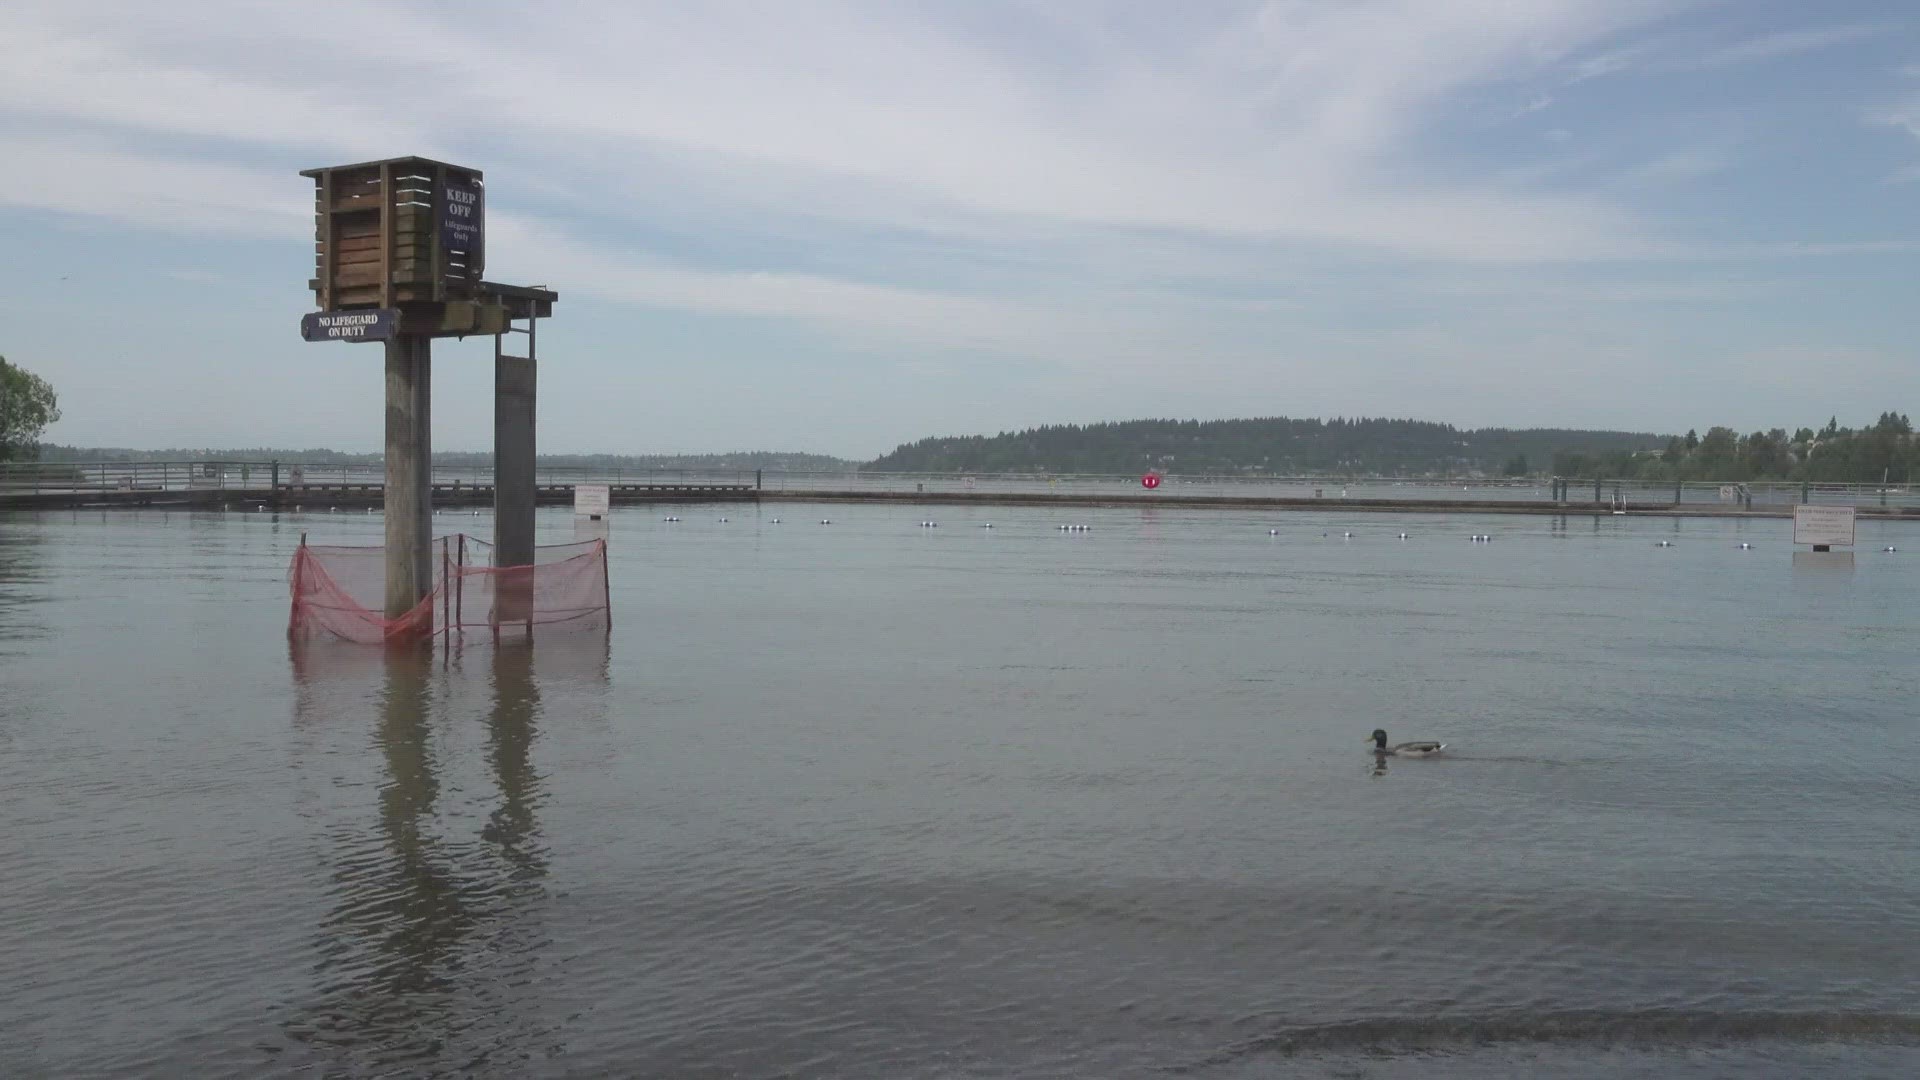 Public Health - Seattle and King County says the change uses more real-time data to make decisions about beaches, in hopes of keeping people safe.